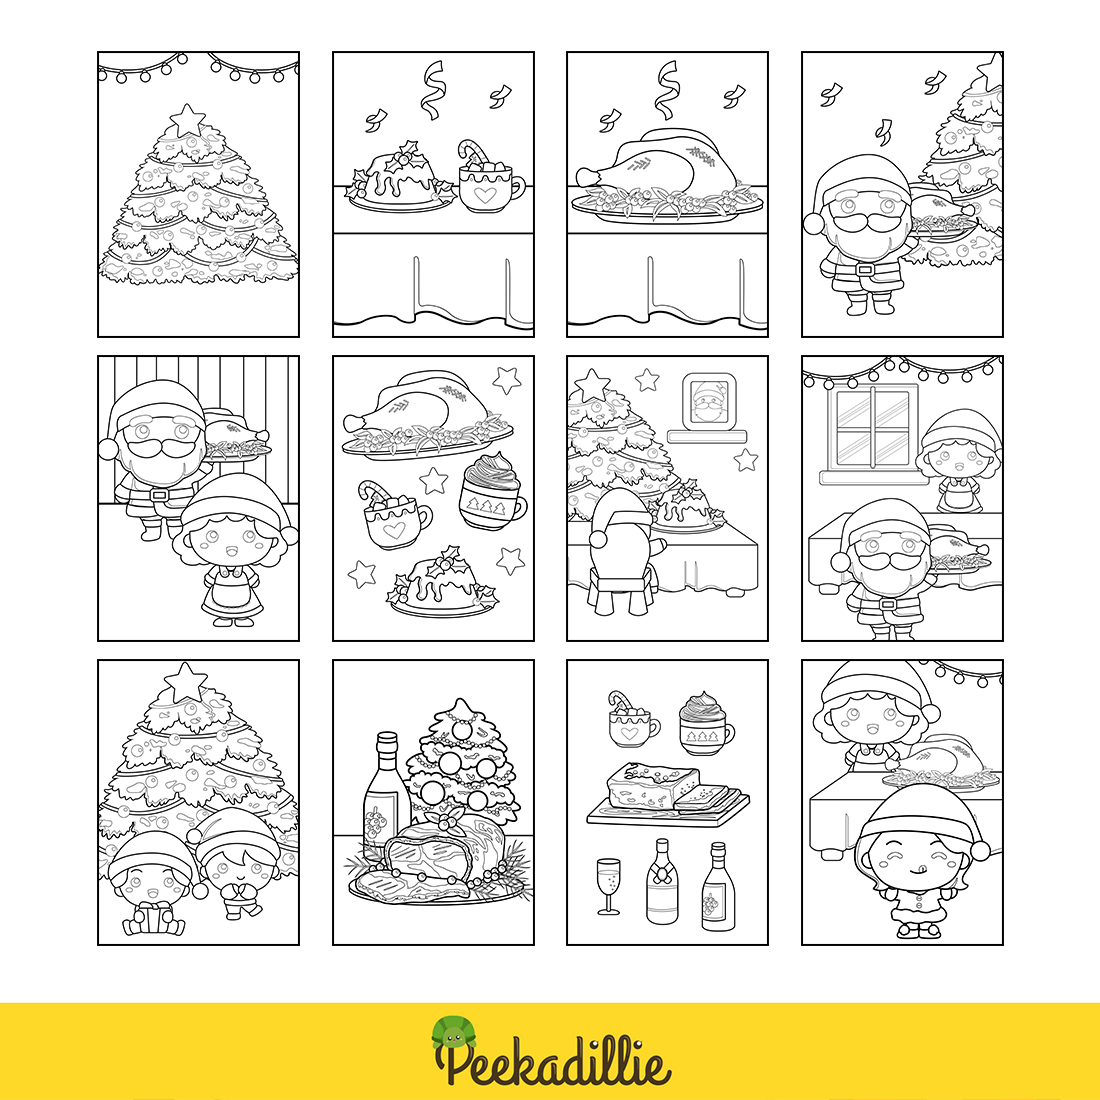 Cute Santa Claus Christmas Tree Feast Dinner Celebration Party Holiday Food with Family Coloring Pages for Kids and Adult preview image.